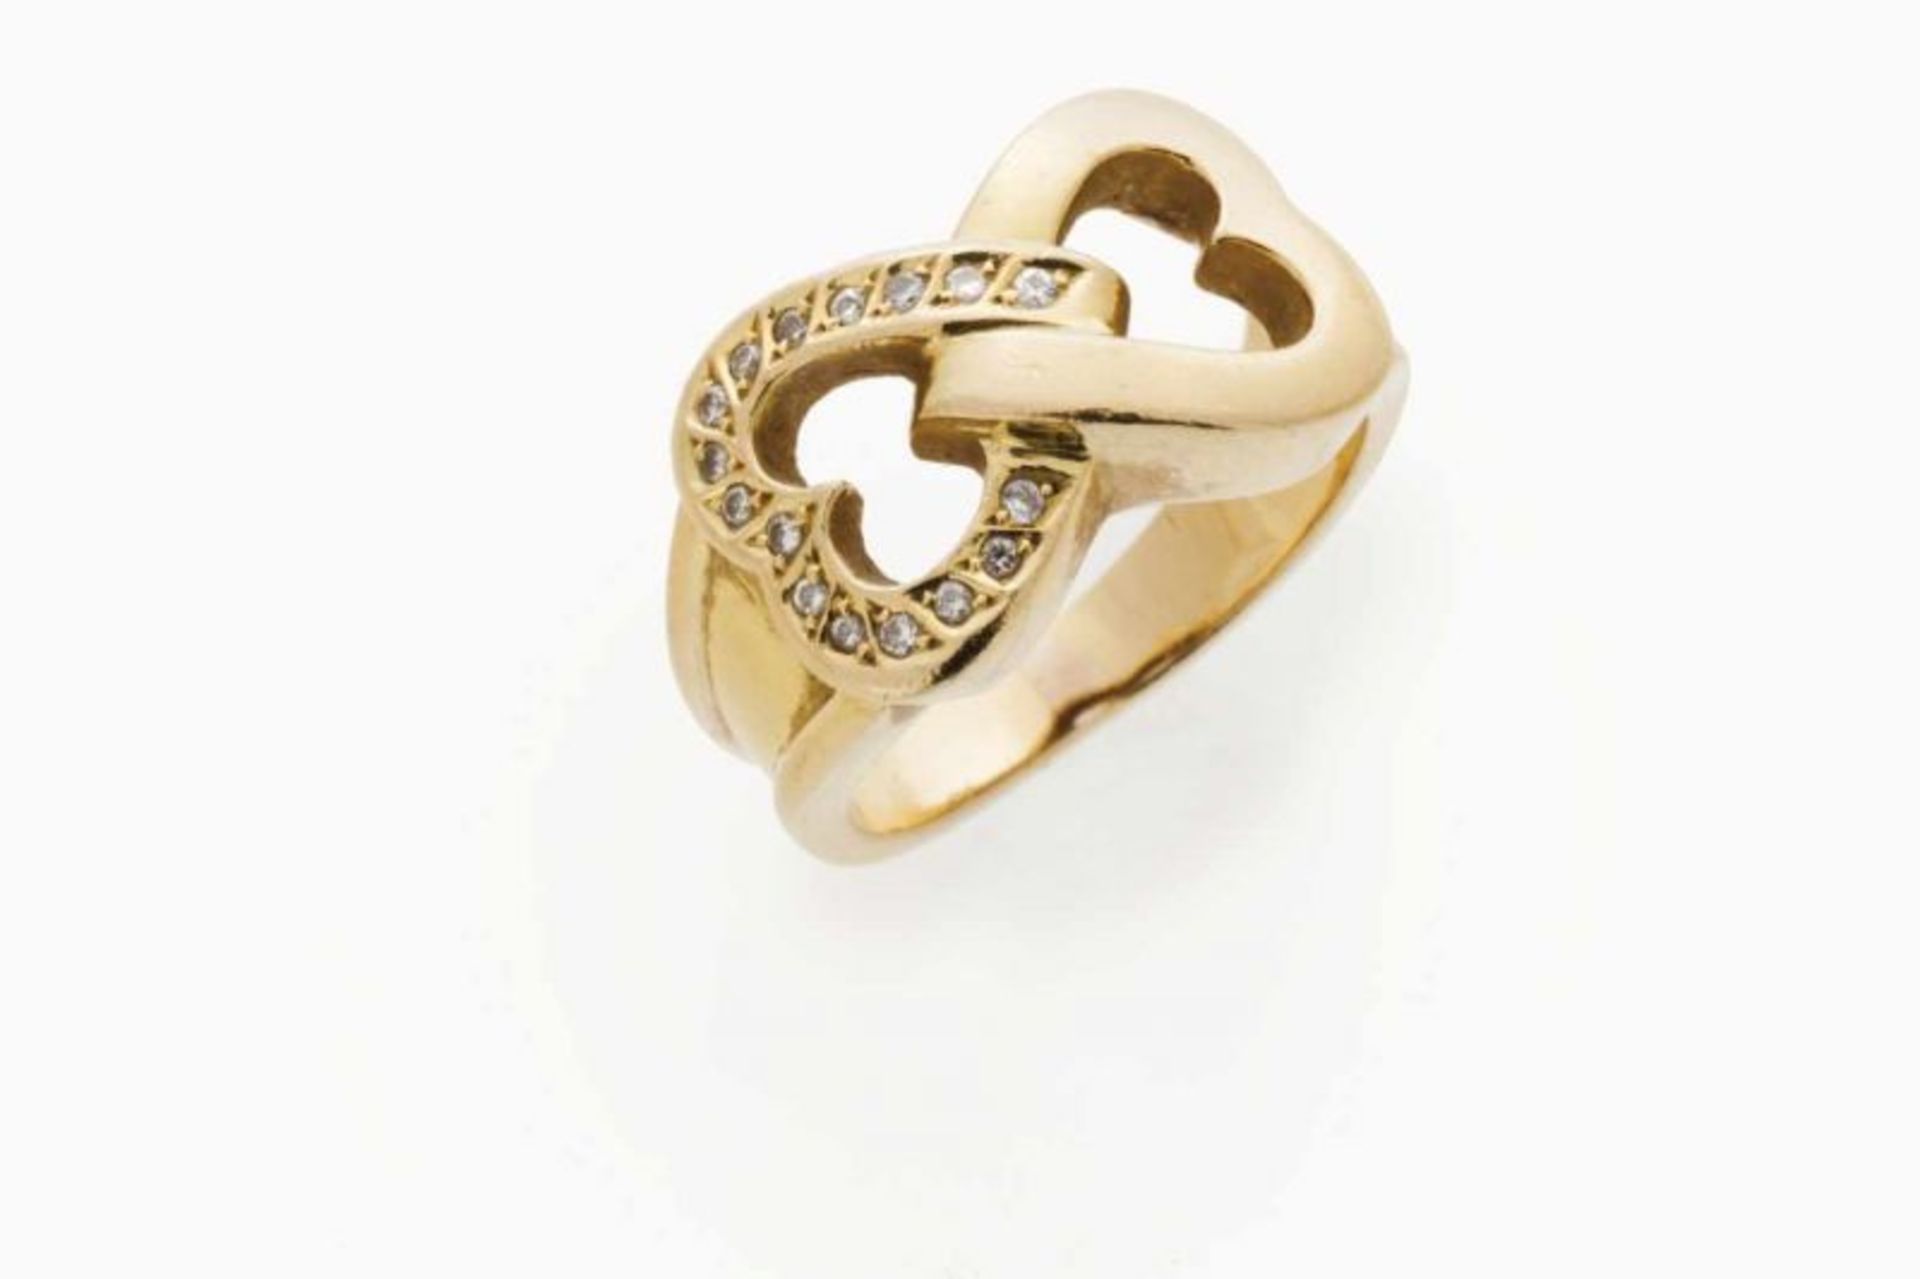 A ring Gold Designed as two hearts, set with small brilliant cut diamonds Portuguese assay mark (